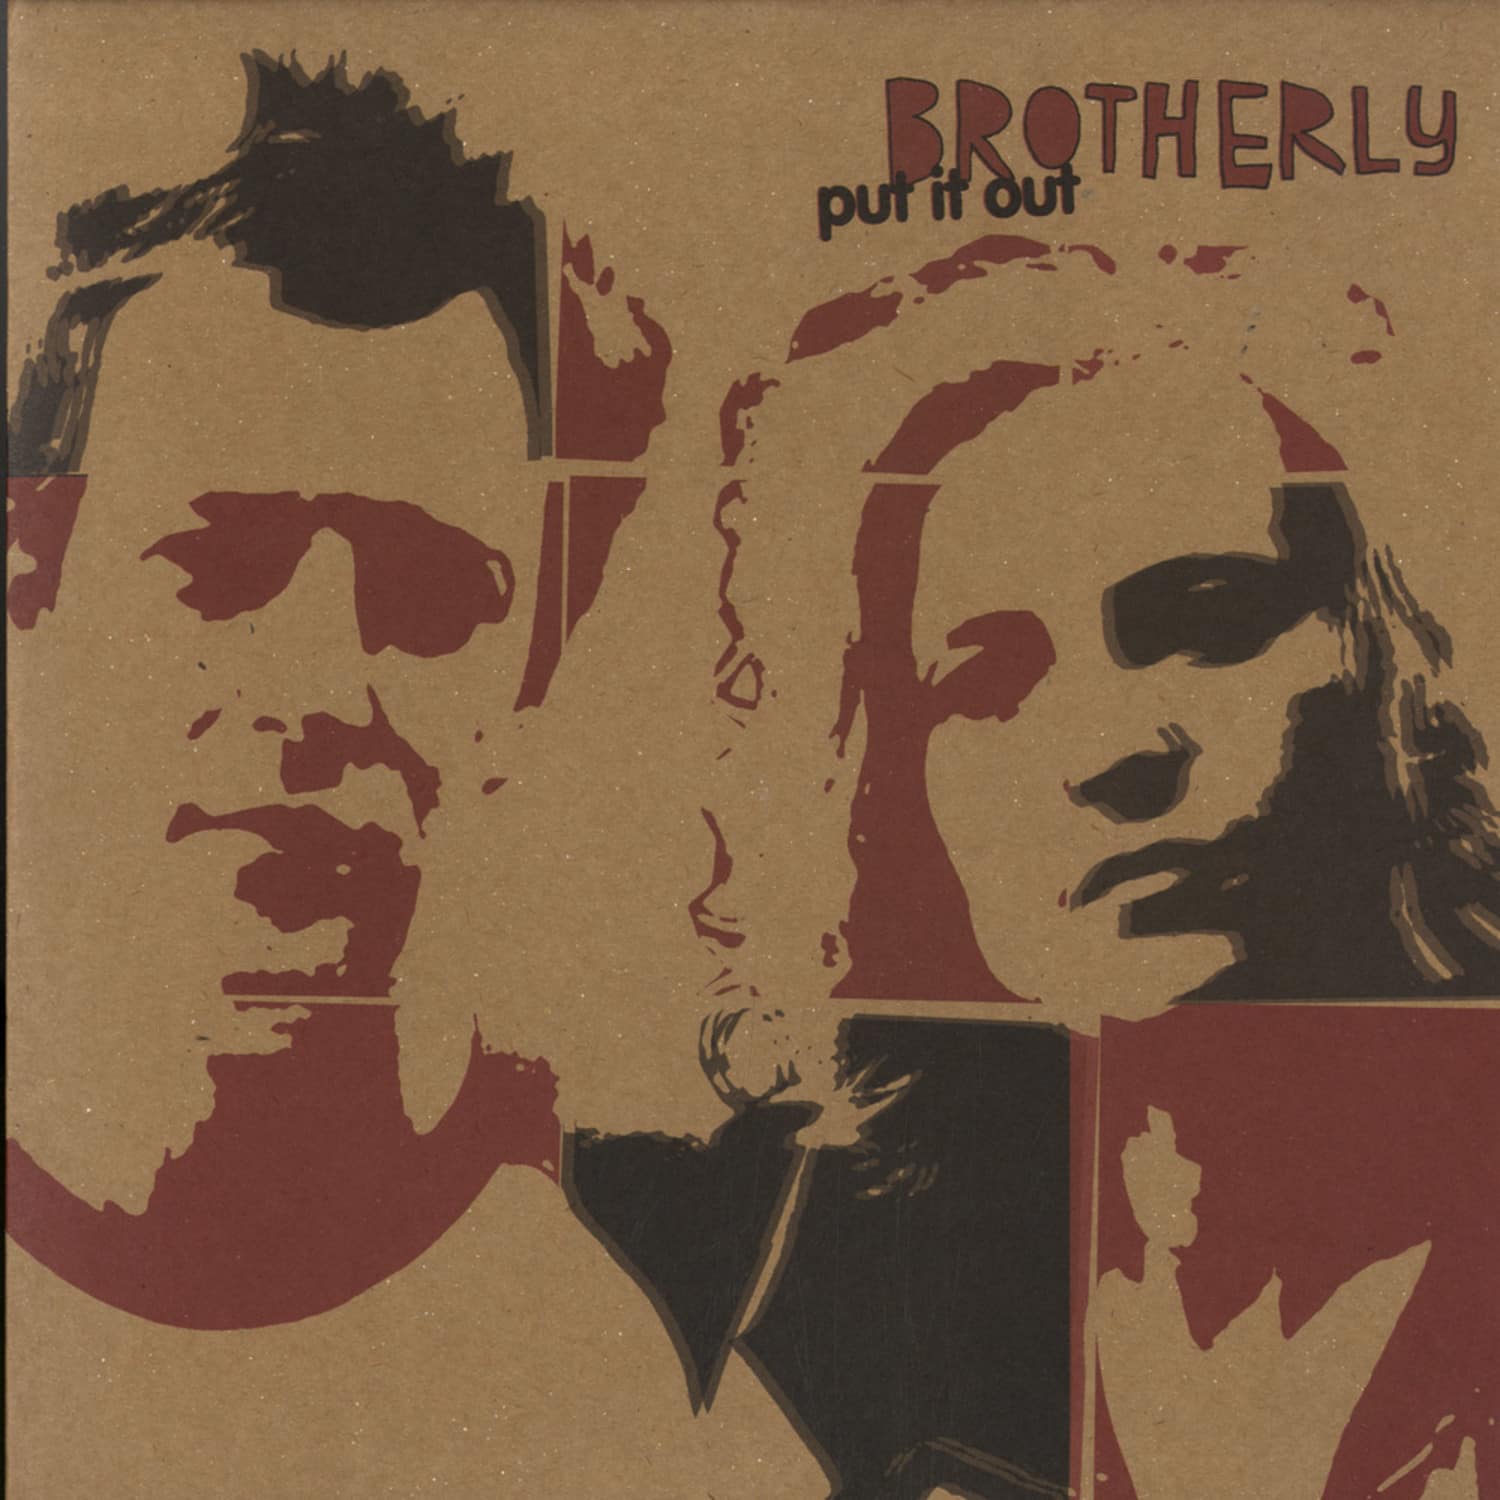 Brotherly - PUT IT OUT